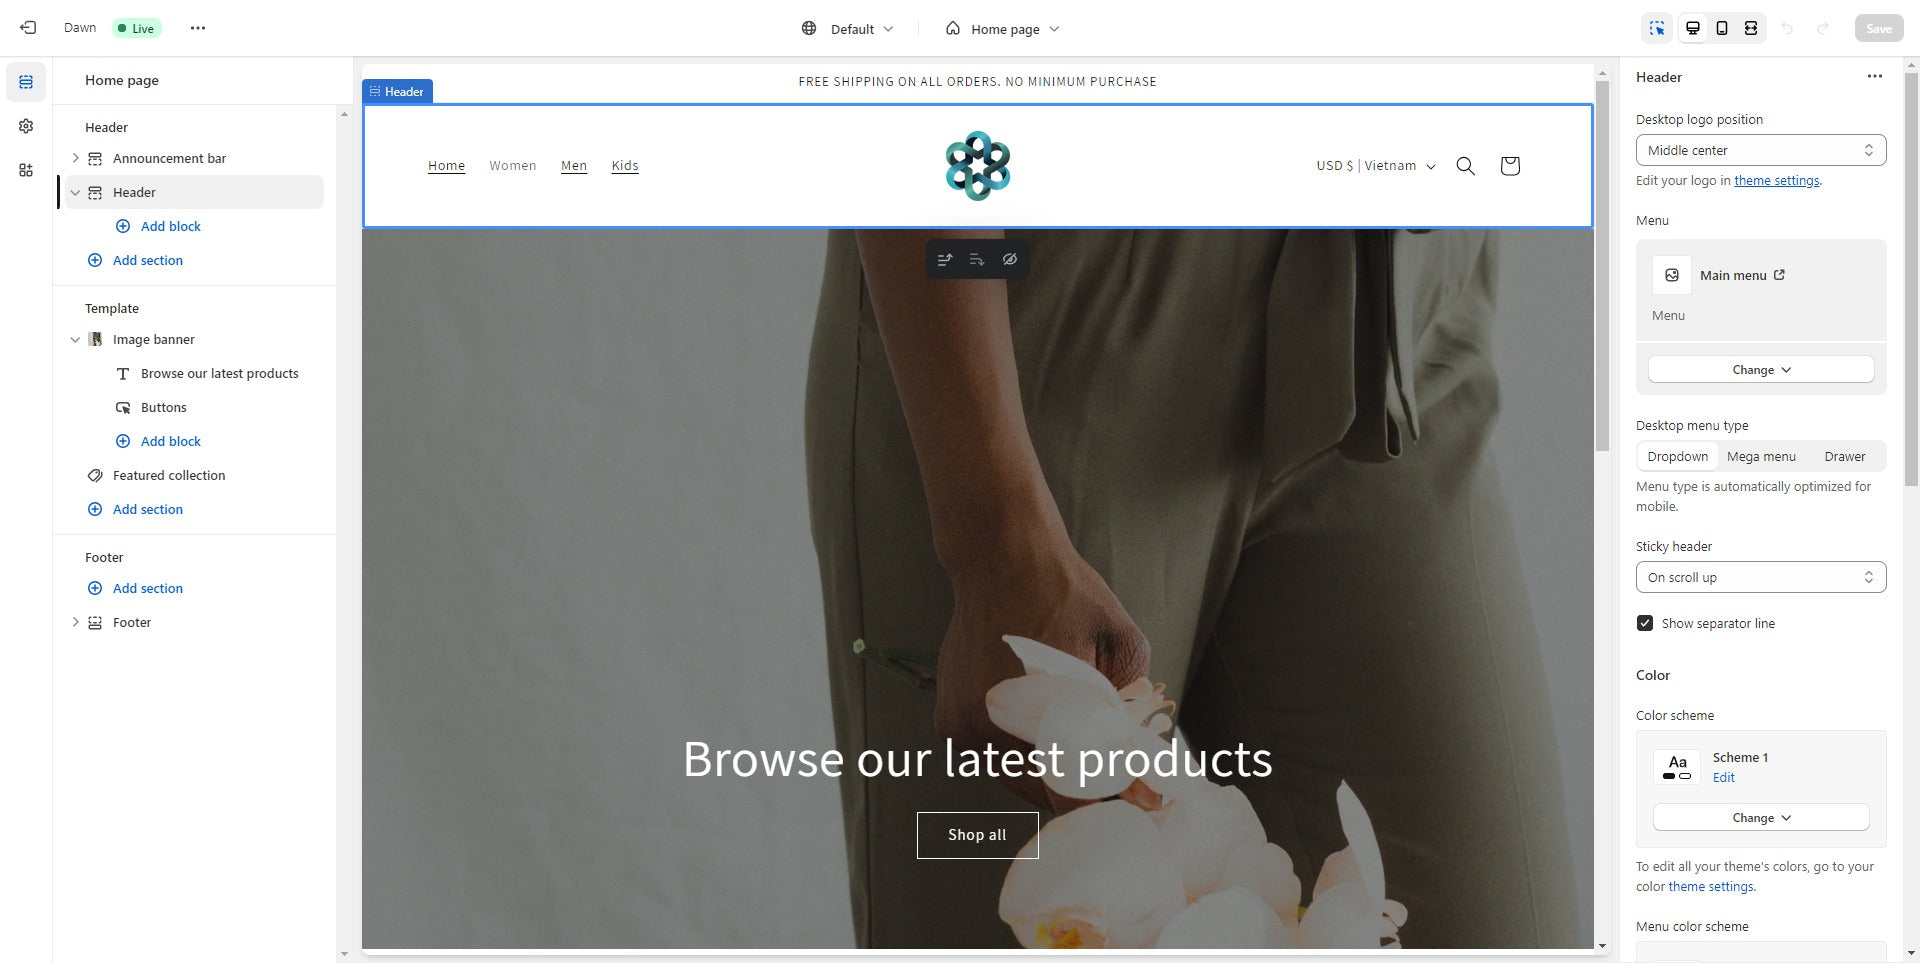 The Next Generation of Shopify Themes: Dawn Theme Review - 5